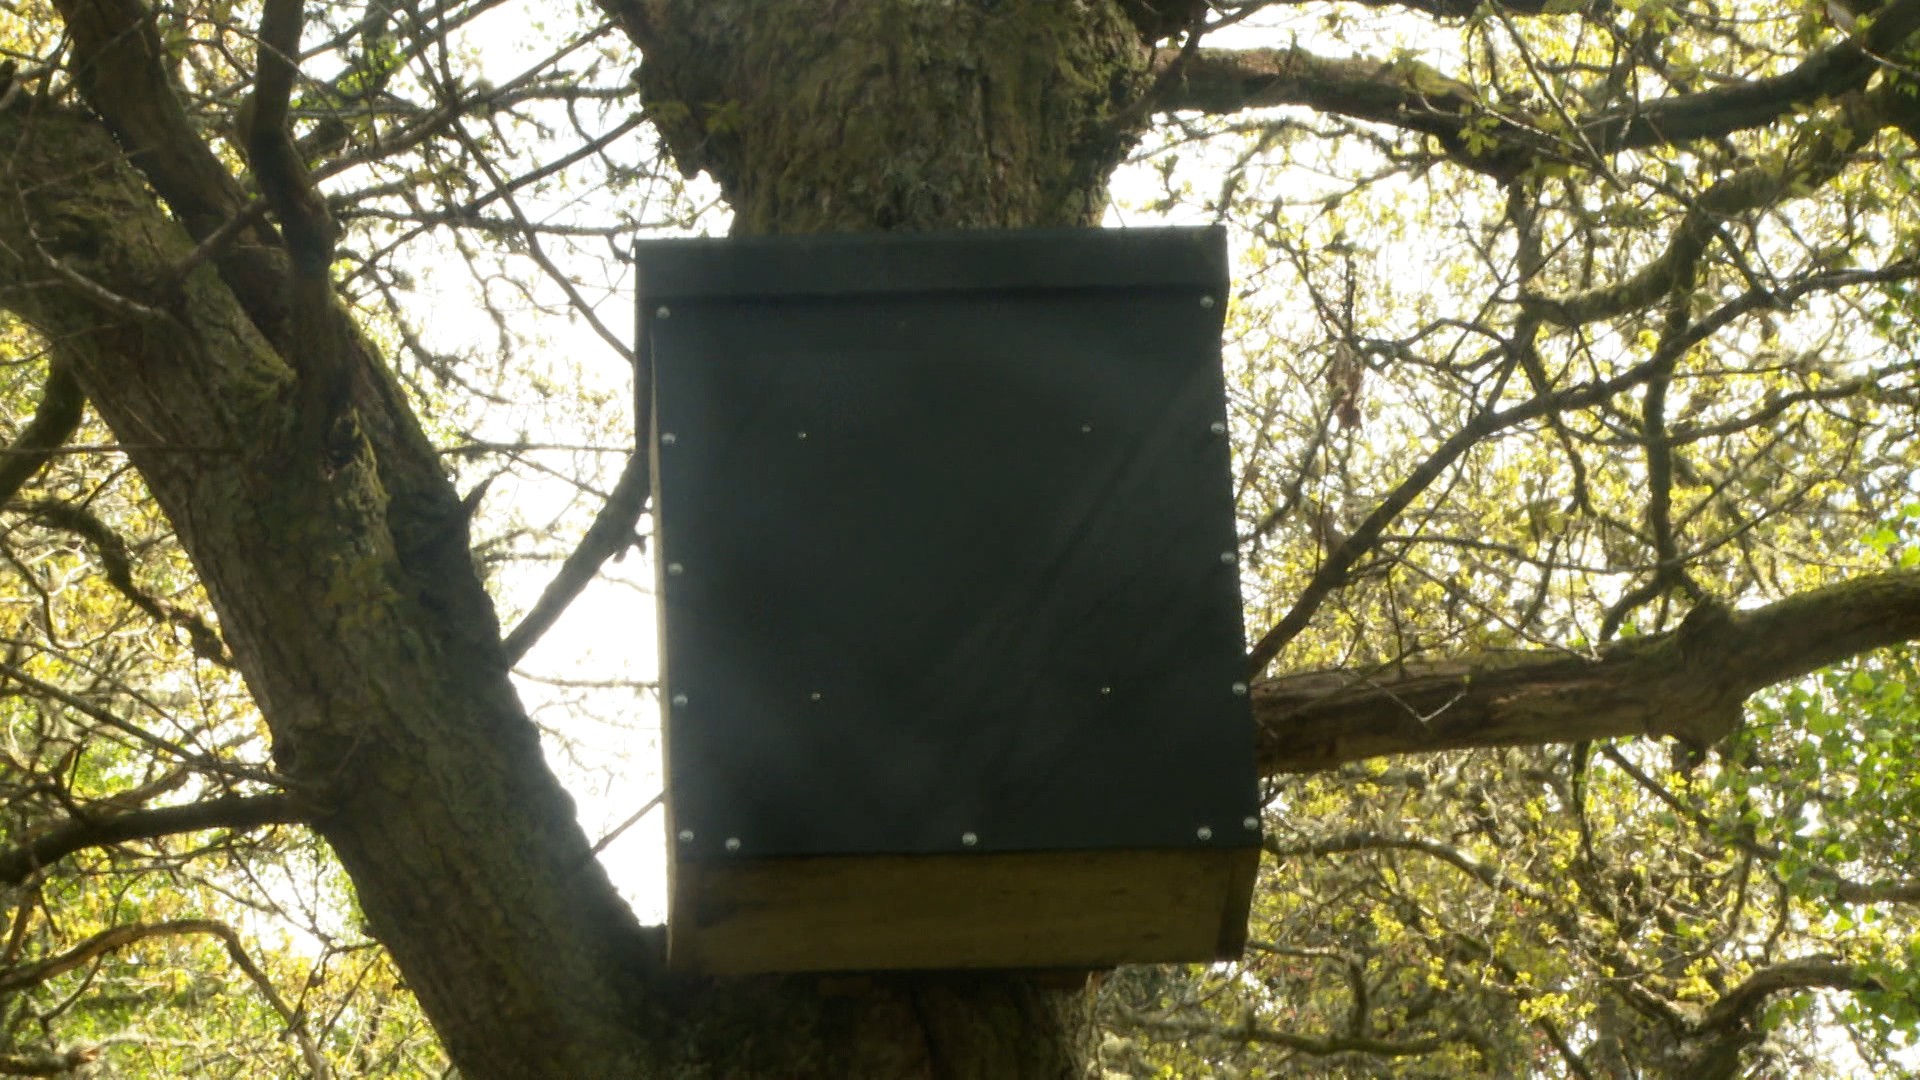 The nest boxes were installed to encourage the species to breed